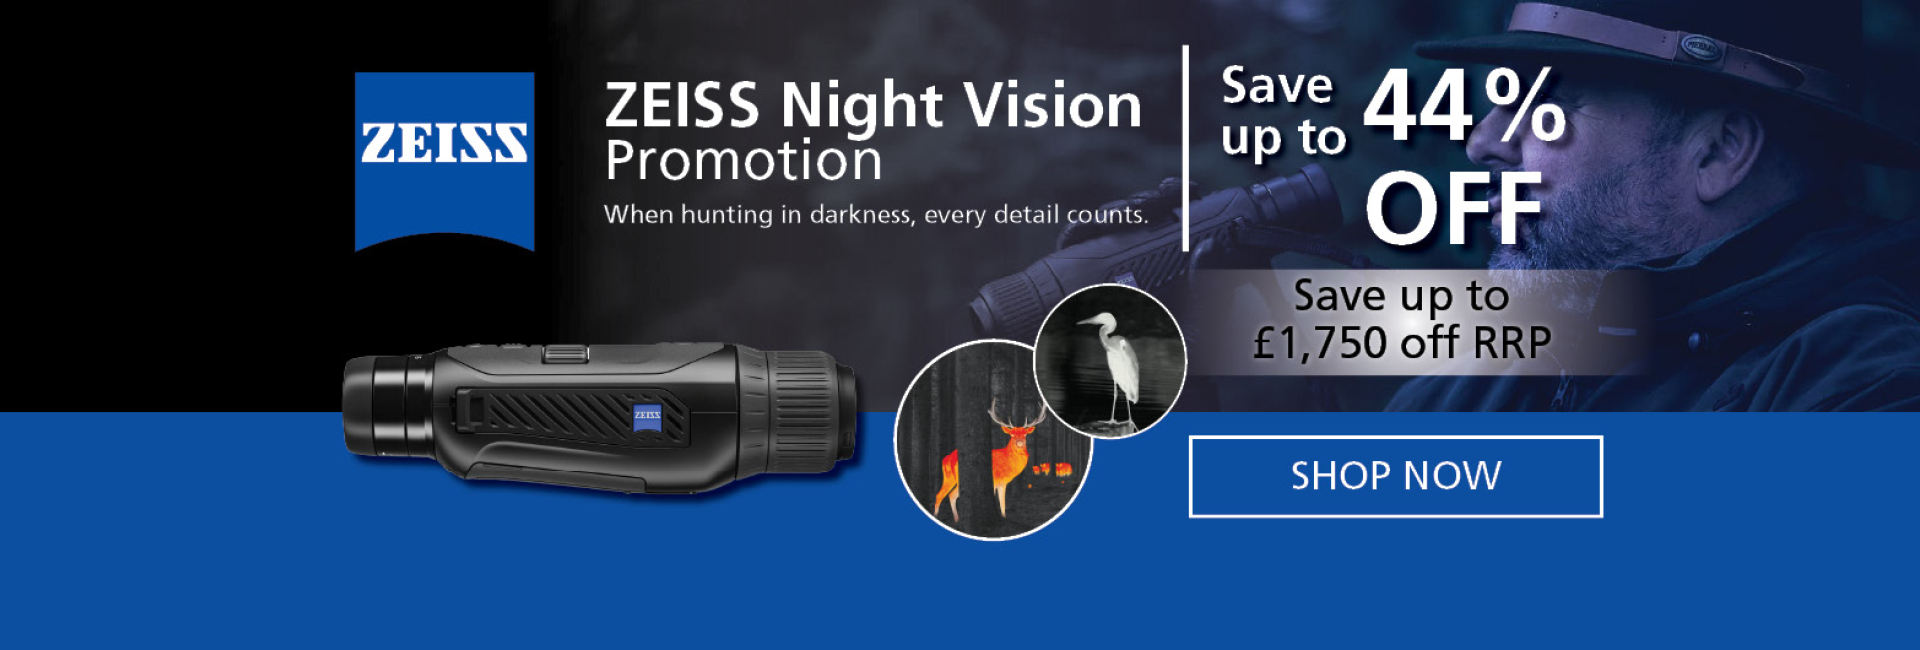 Zeiss Thermal Promotion - July 24